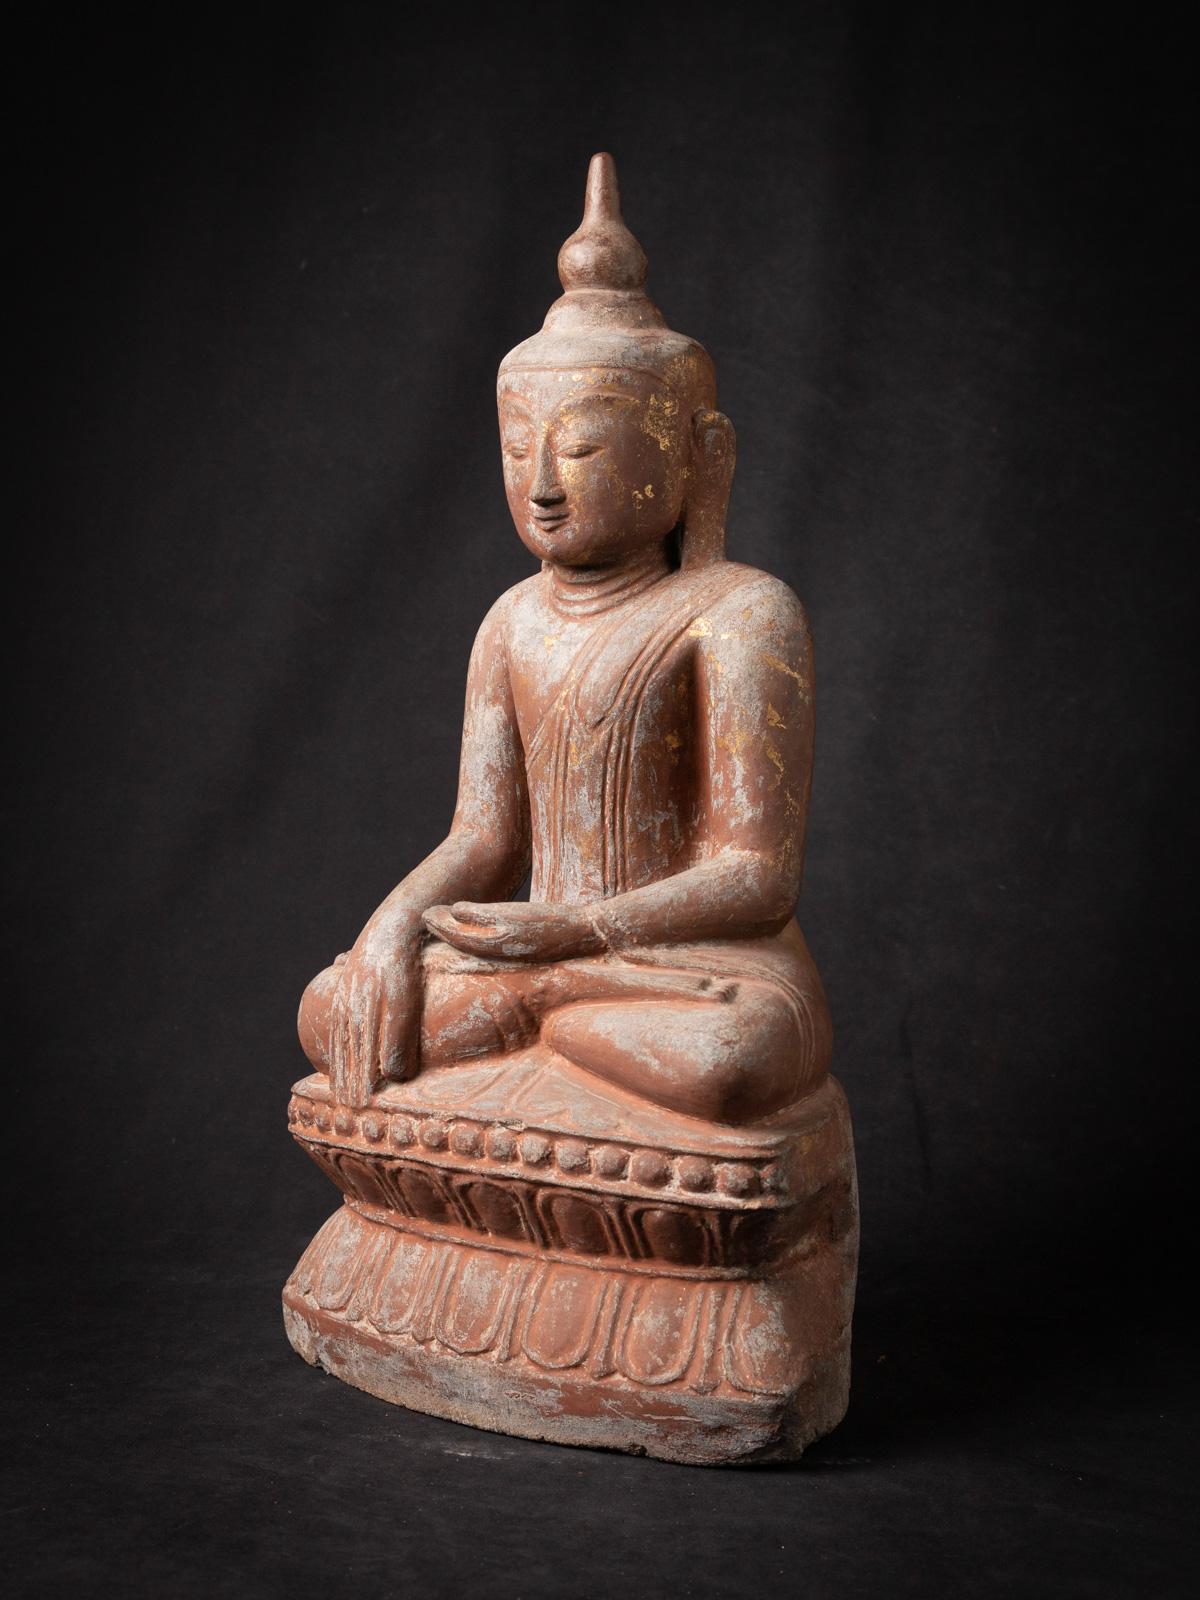 The Antique Burmese sandstone Buddha statue is a captivating piece that exudes the charm and artistry of the 18th century. Crafted from high-quality sandstone, this statue stands 53 cm tall, with dimensions of 28.3 cm wide and 19.2 cm deep. Its Shan